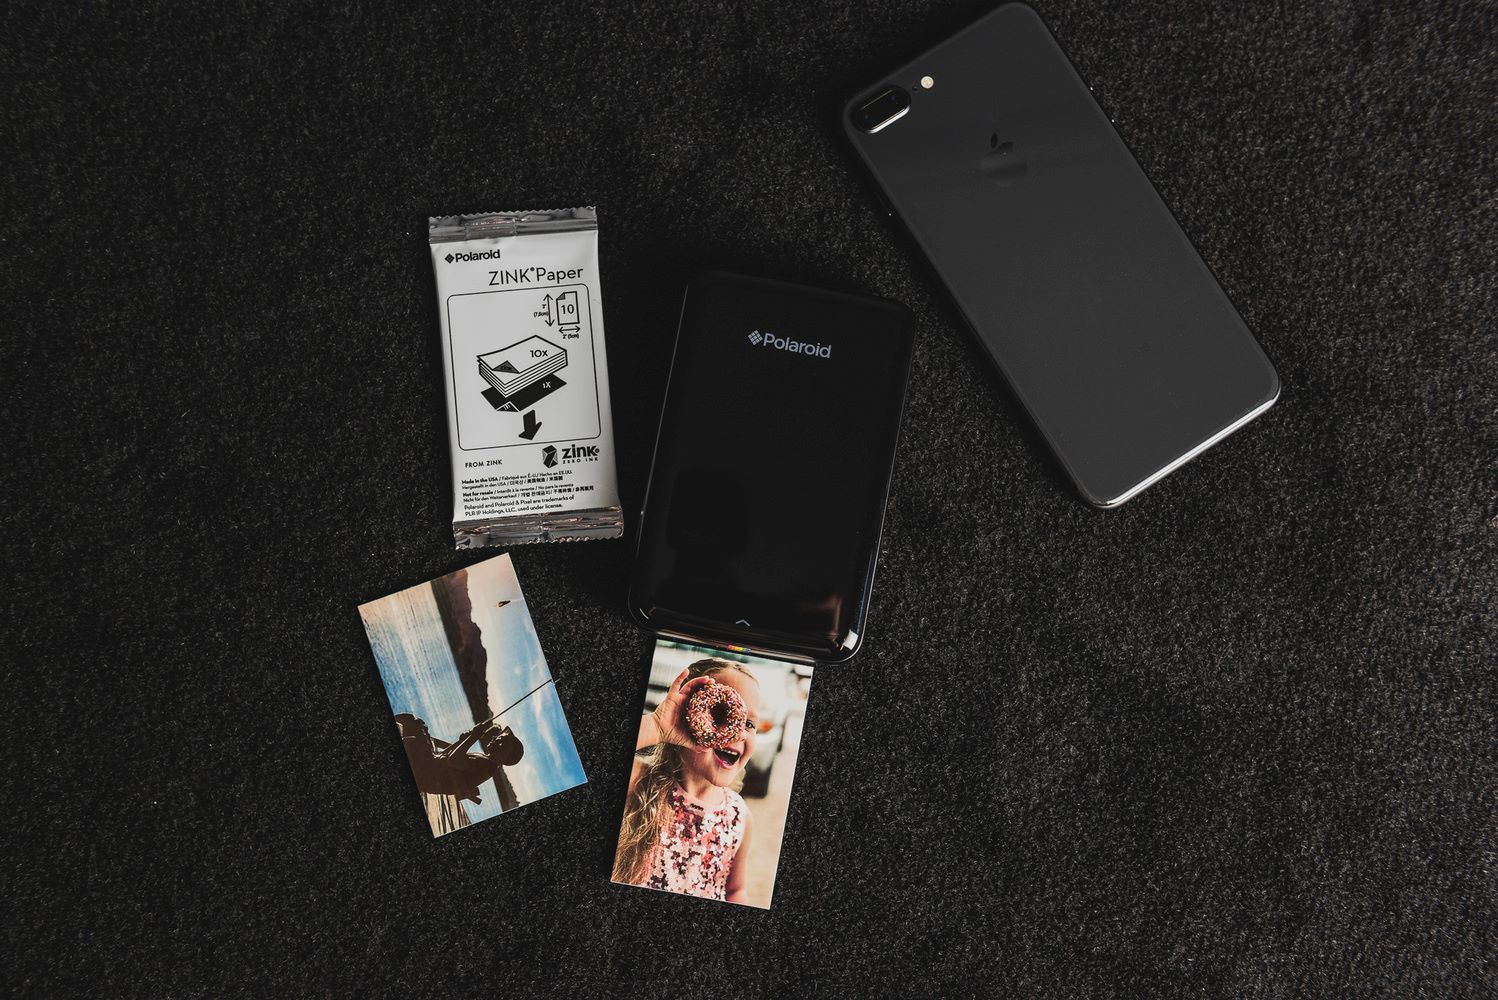 Polaroid Zip Instant Photoprinter Review: It’s A Snap To Use